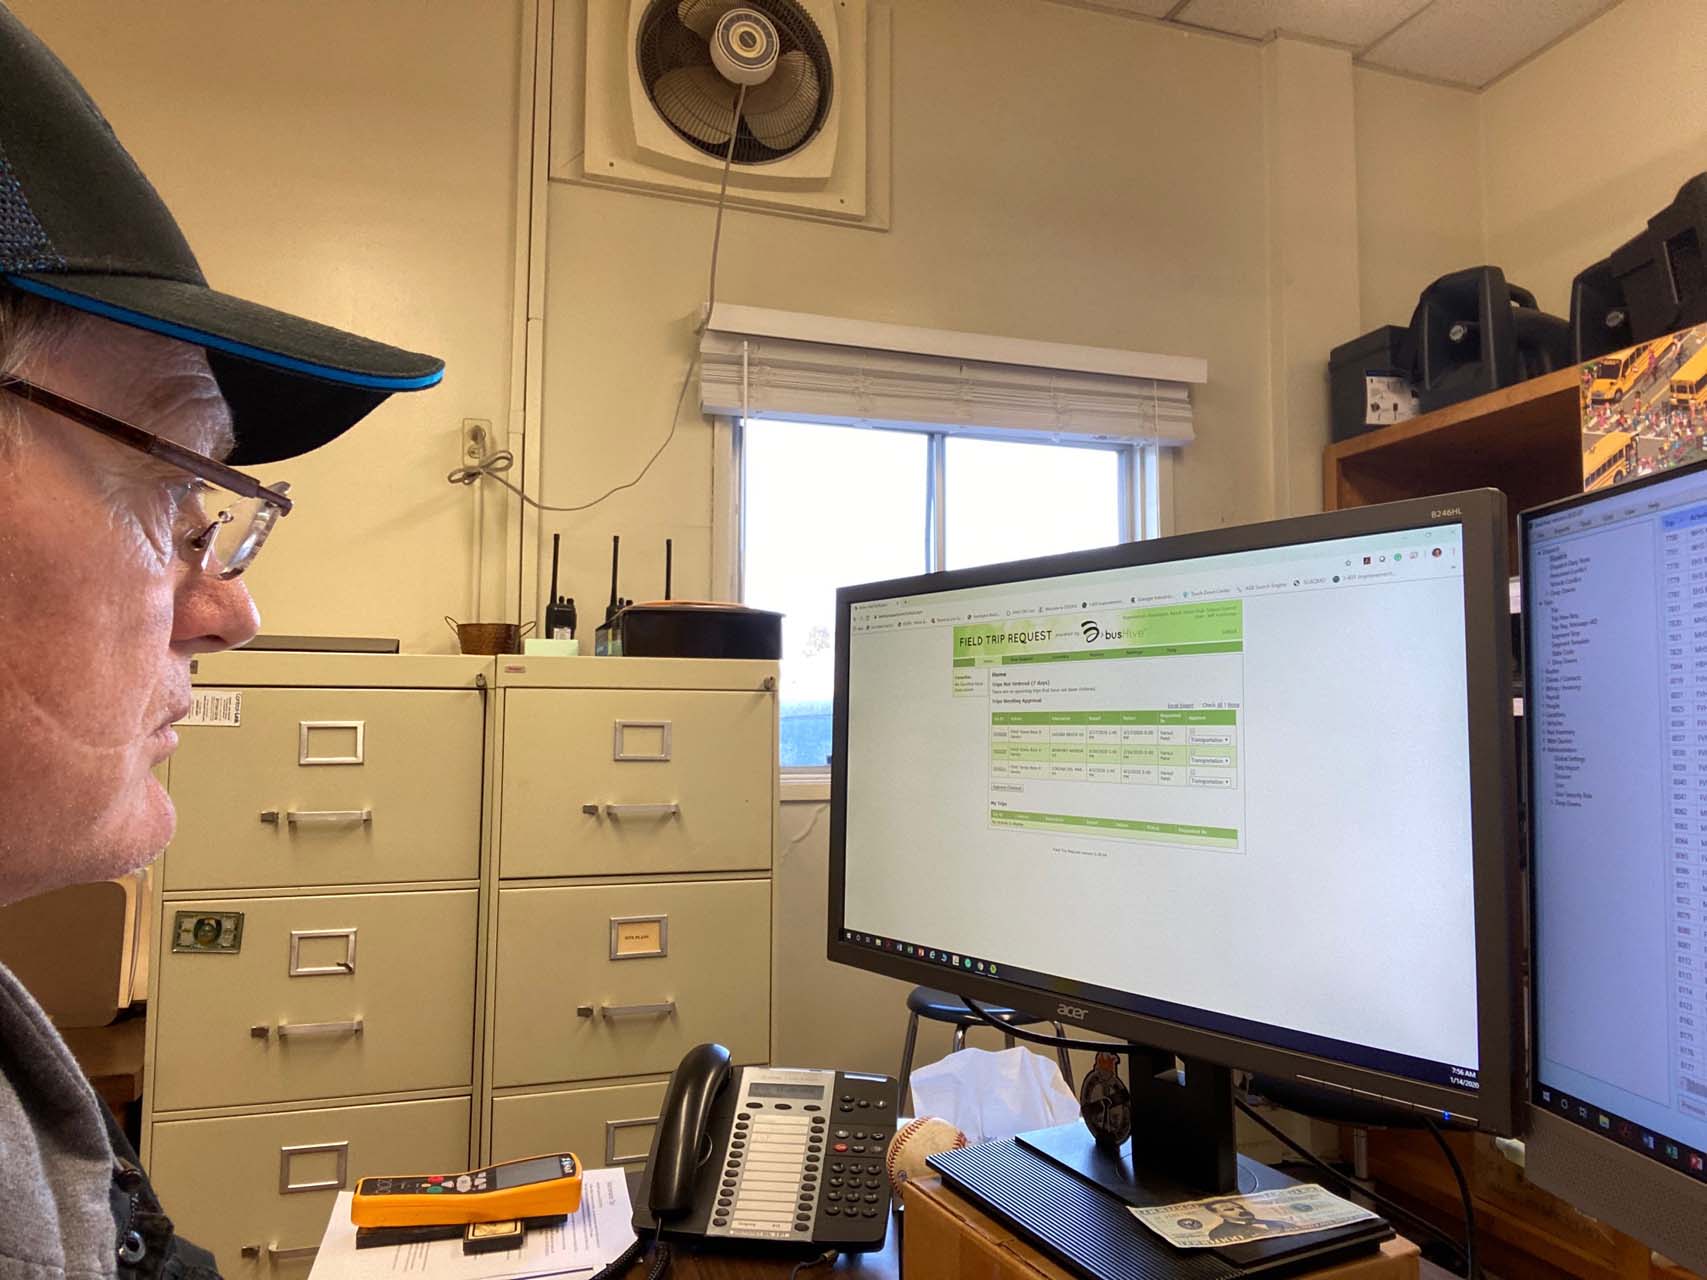 Jeff Hutchings, HBUHSD‘s manager of maintenance, operations and transportation, is happy with how the busHive field trip management system has improved his district's operations.